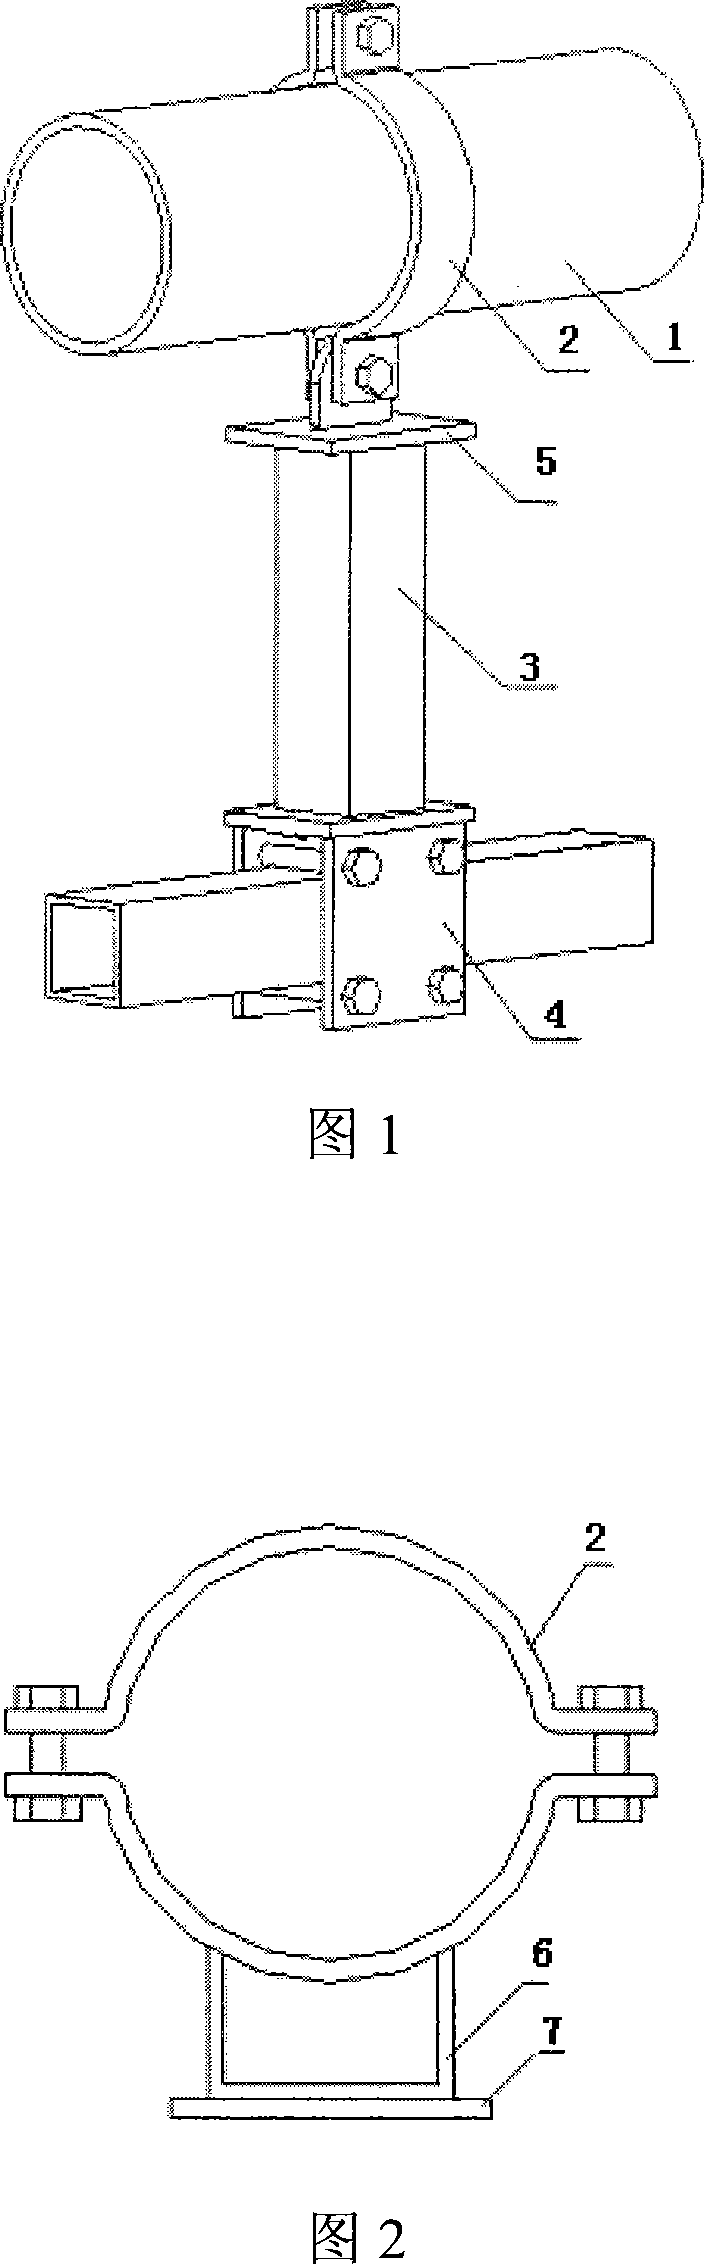 Conduit single arm sliding/guiding support assembly